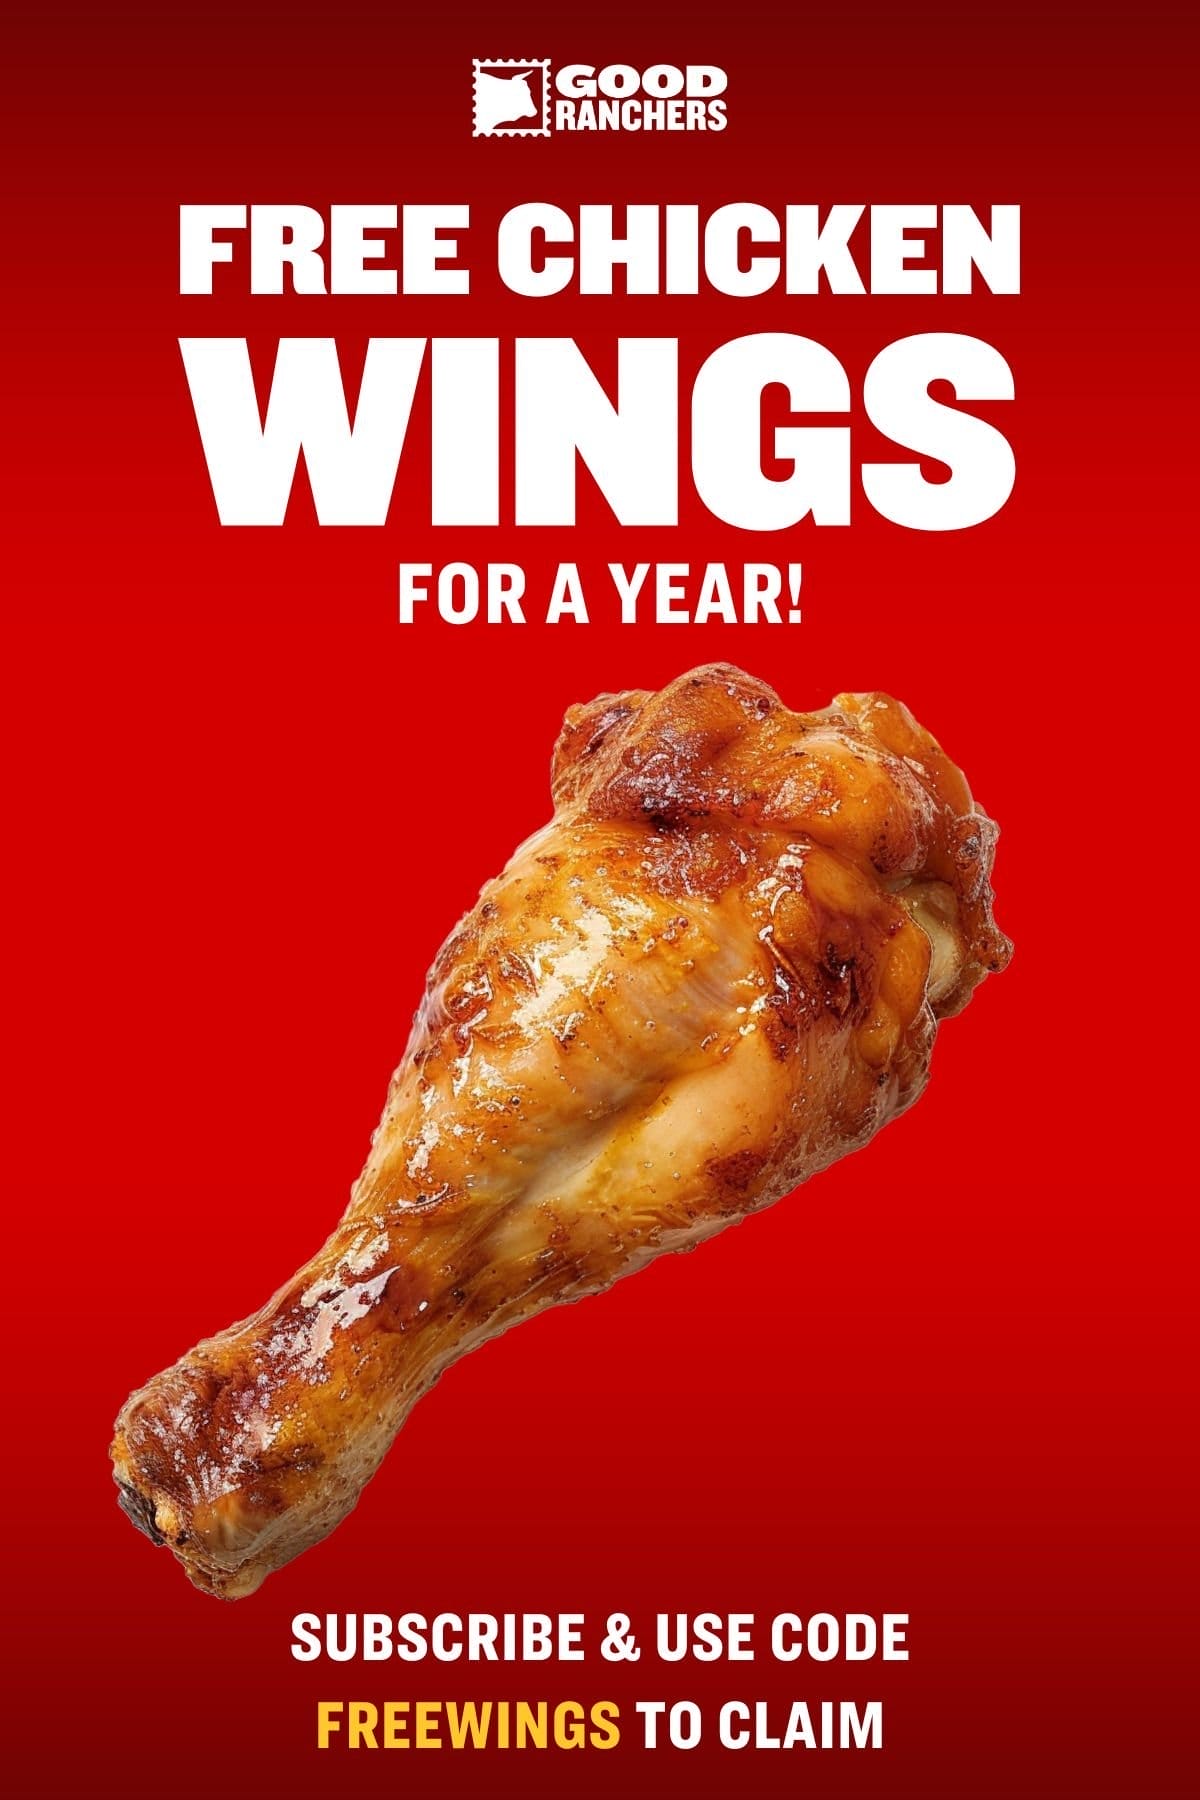 Subscribe and get 2 lbs of Good Ranchers chicken wings for FREE for a year!